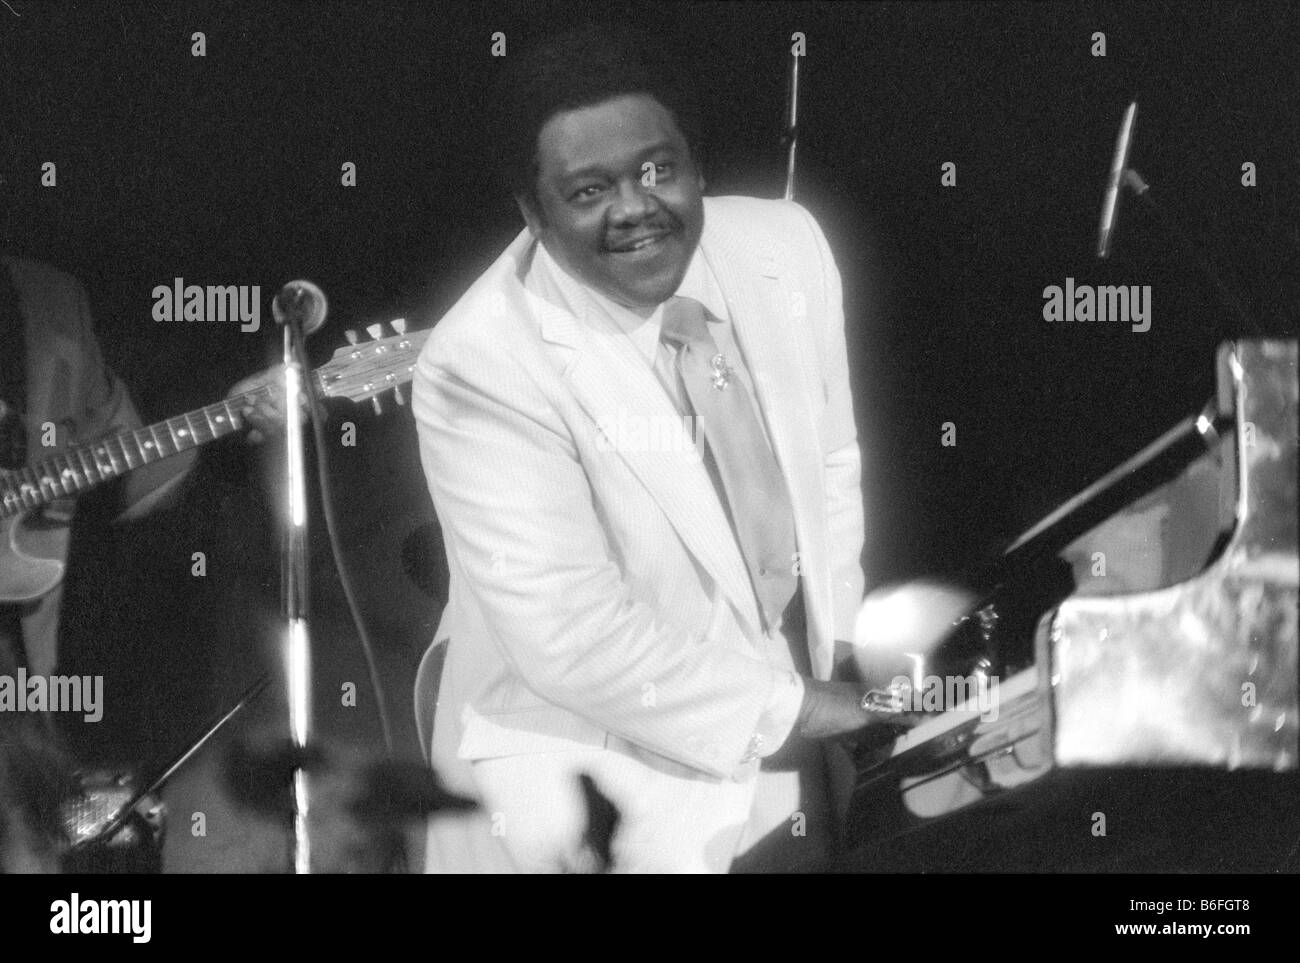 Fats Domino concert, Eutiner Jazz Days, on July 23, 1980 in Germany, Europe Stock Photo